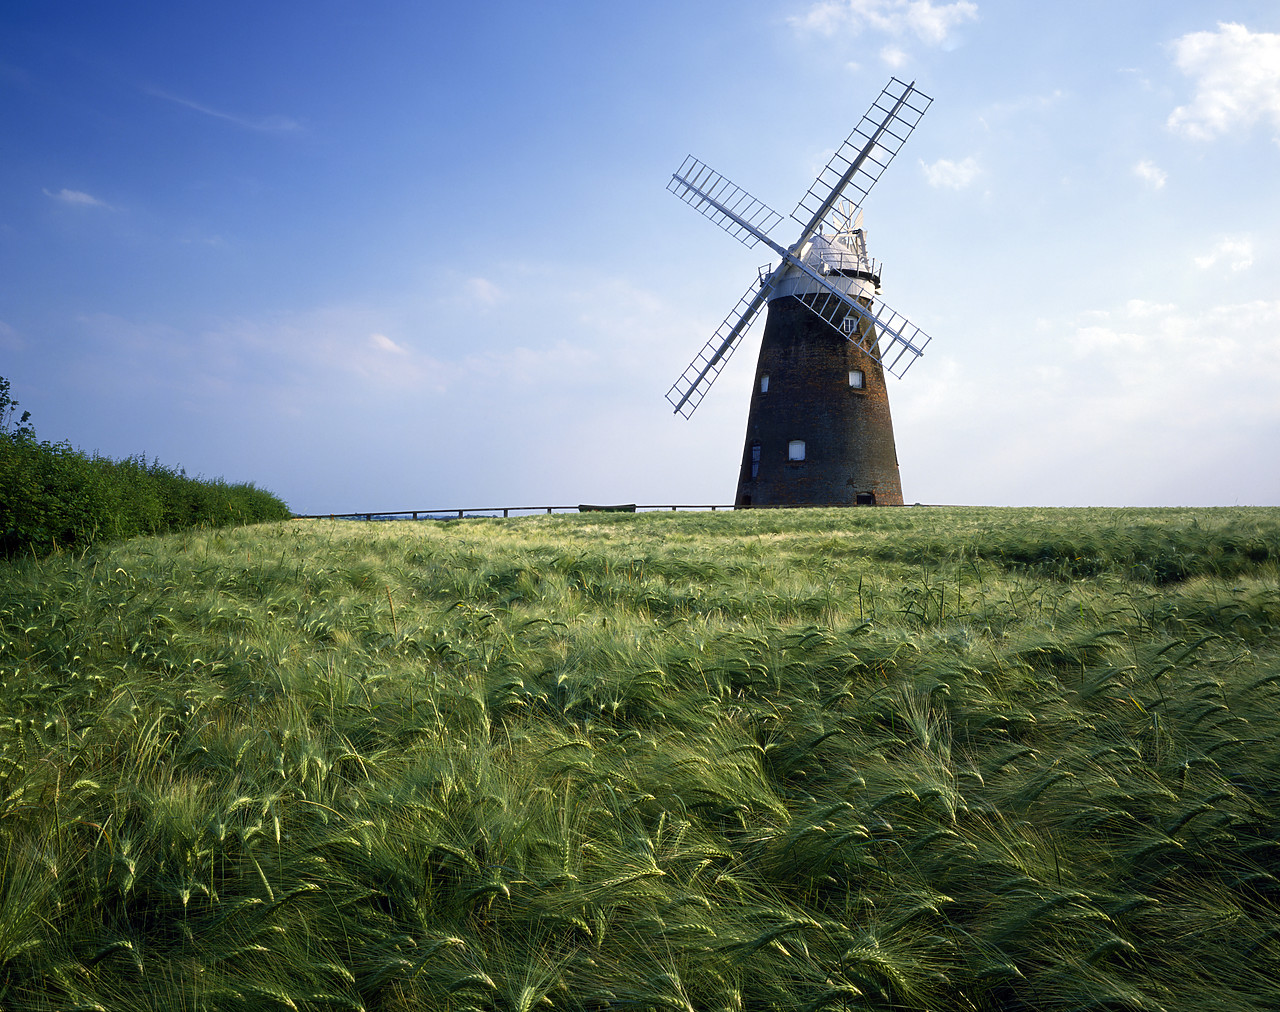 #892254-1 - Thaxted Mill, Thaxted, Essex, England